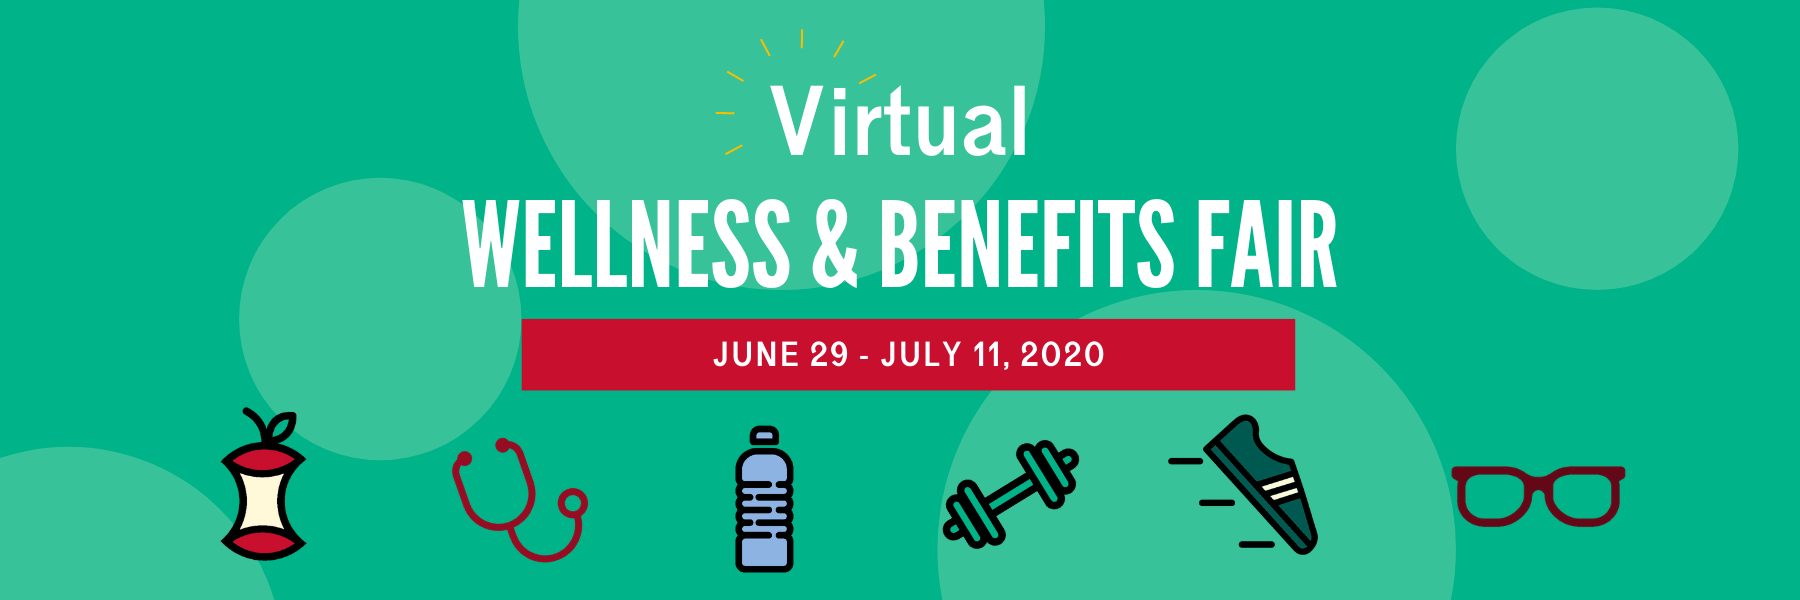 Graphic image: Virtual Wellness and Benefits Fair, June 29 - July 11, 2020